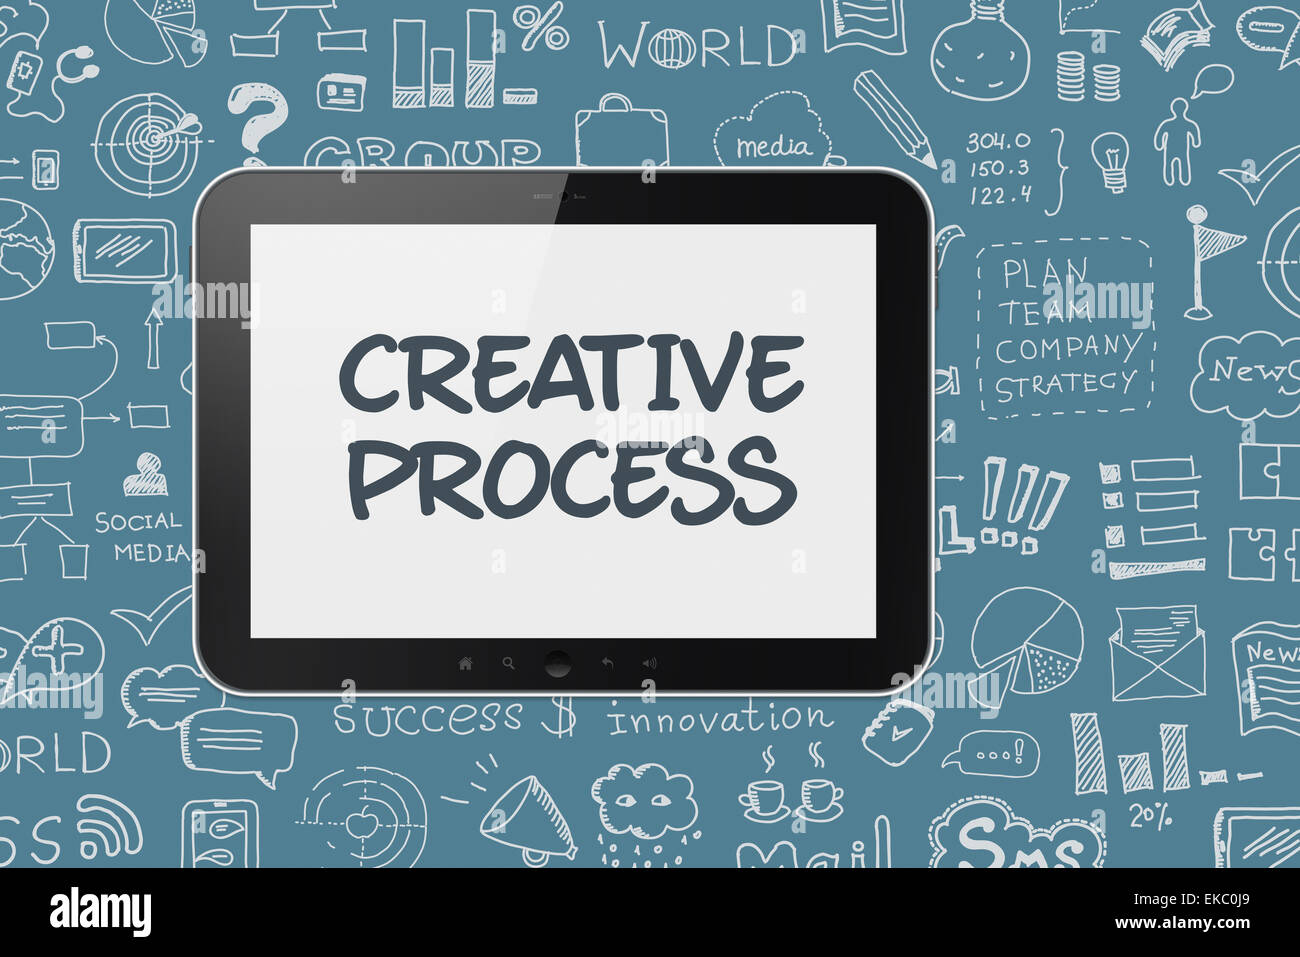 Digital tablet with brainstorming process background Stock Photo